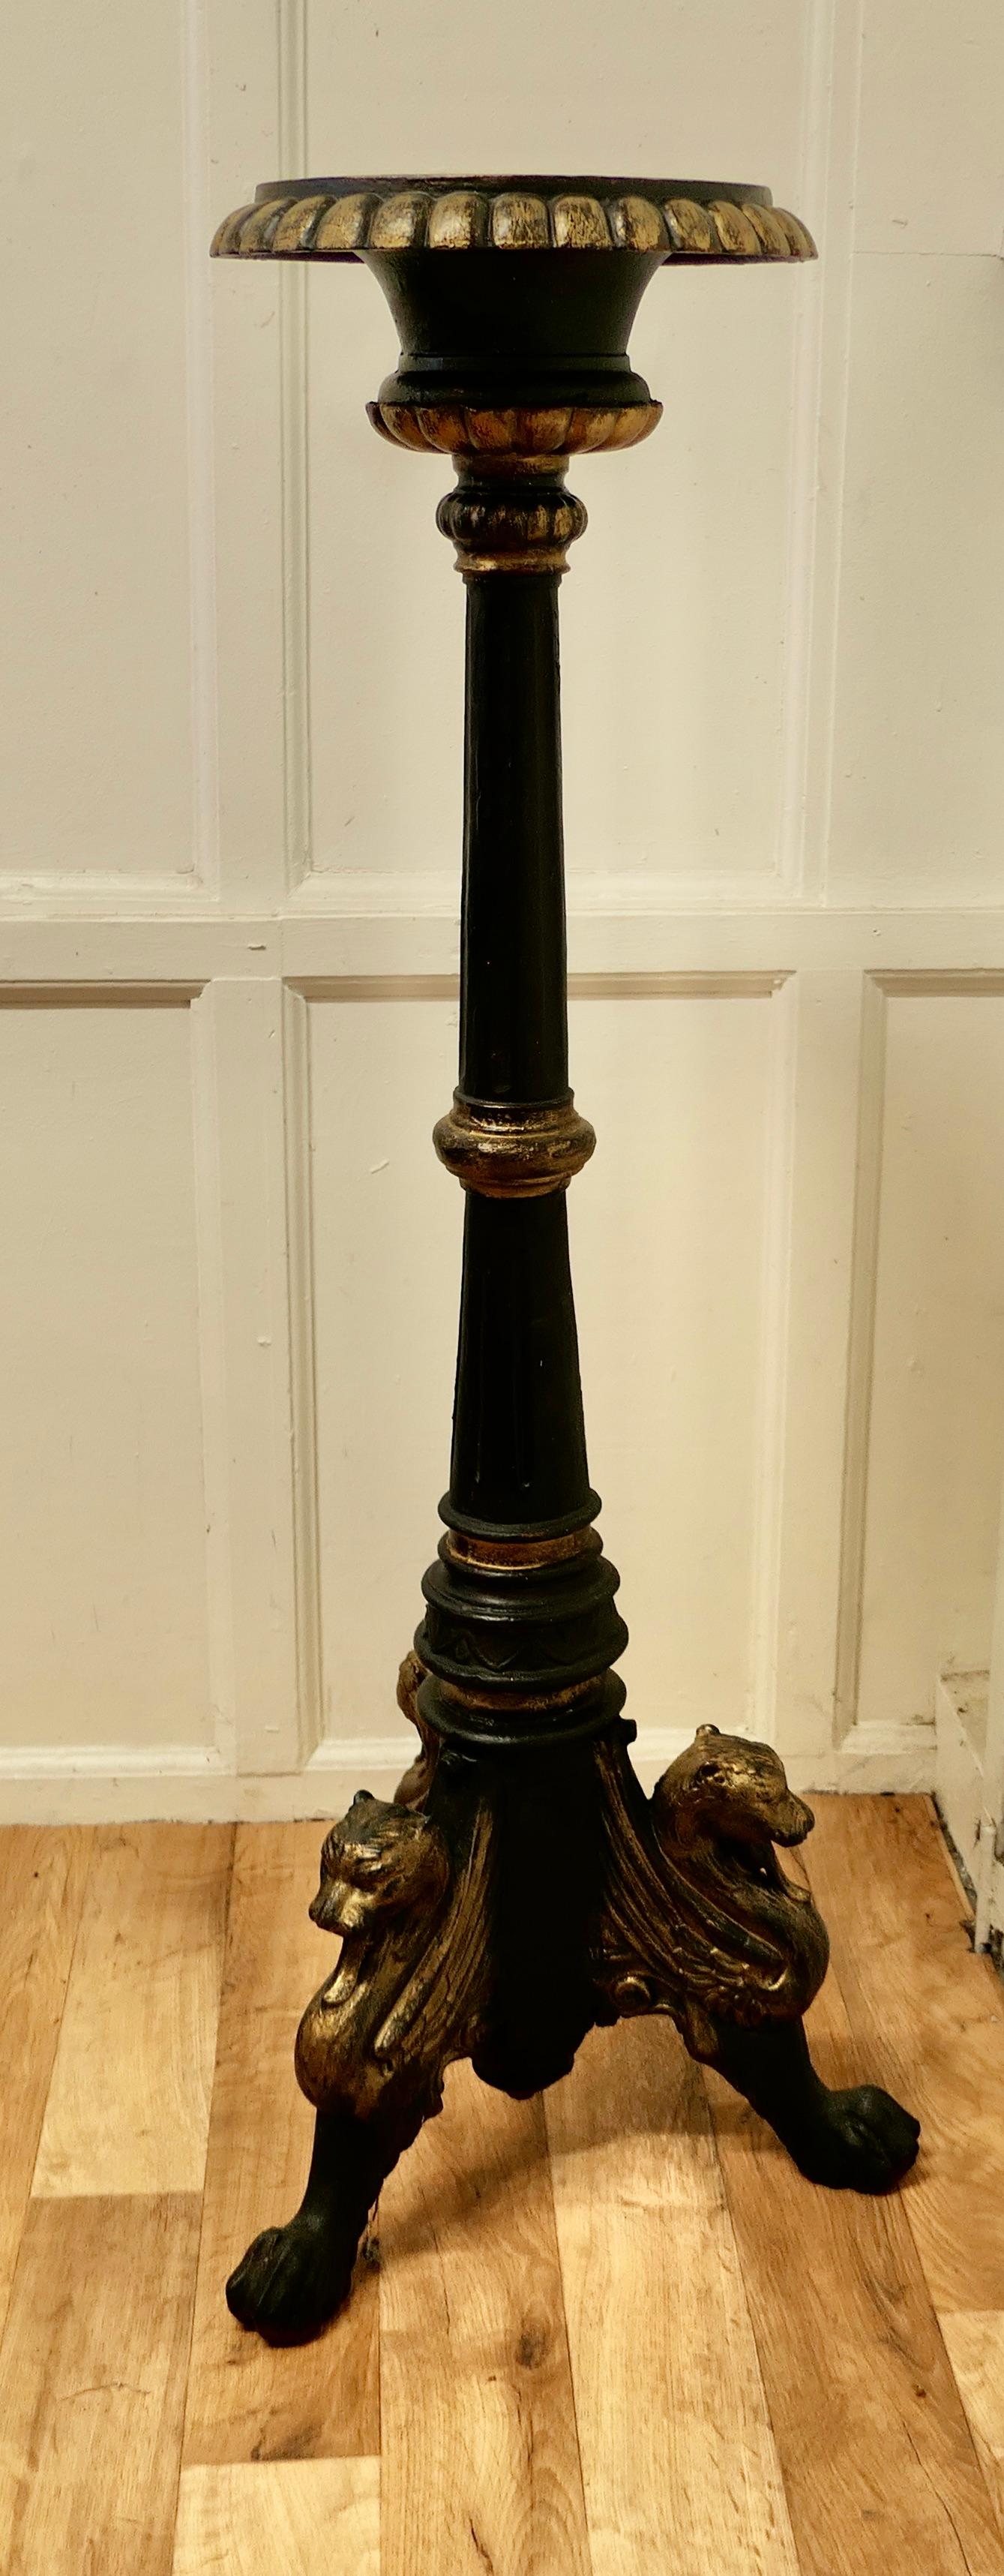 Tall Arts & Crafts cast iron candle stick or torchère.

This is a tall and very heavy Torchere, it has a pricket in the centre of the sconce and stands on a footed base which takes the form of 3 Lions 
The stand has a touch of gold on the black,